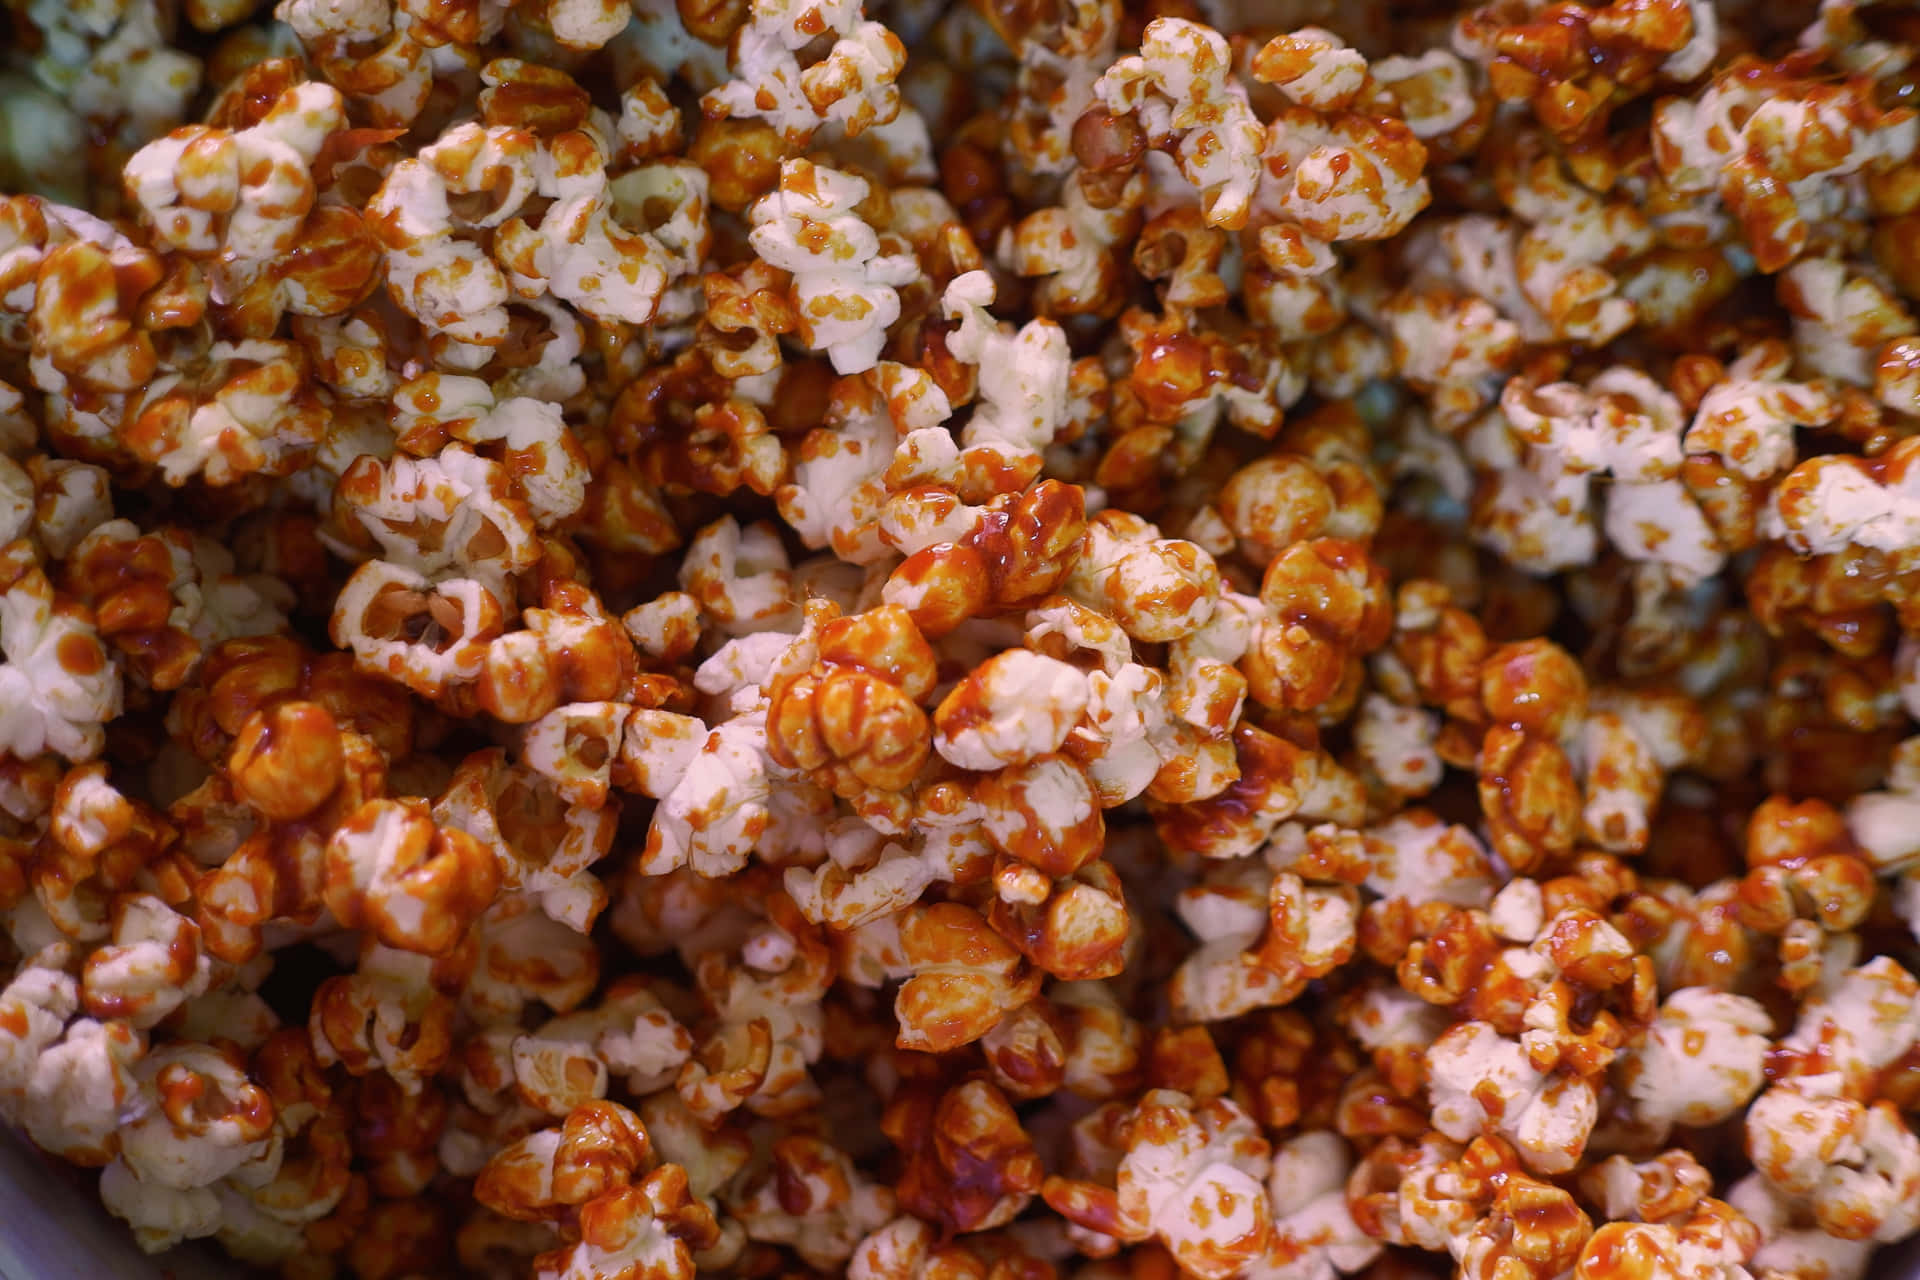 A Bowl Of Popcorn With A Brown Color